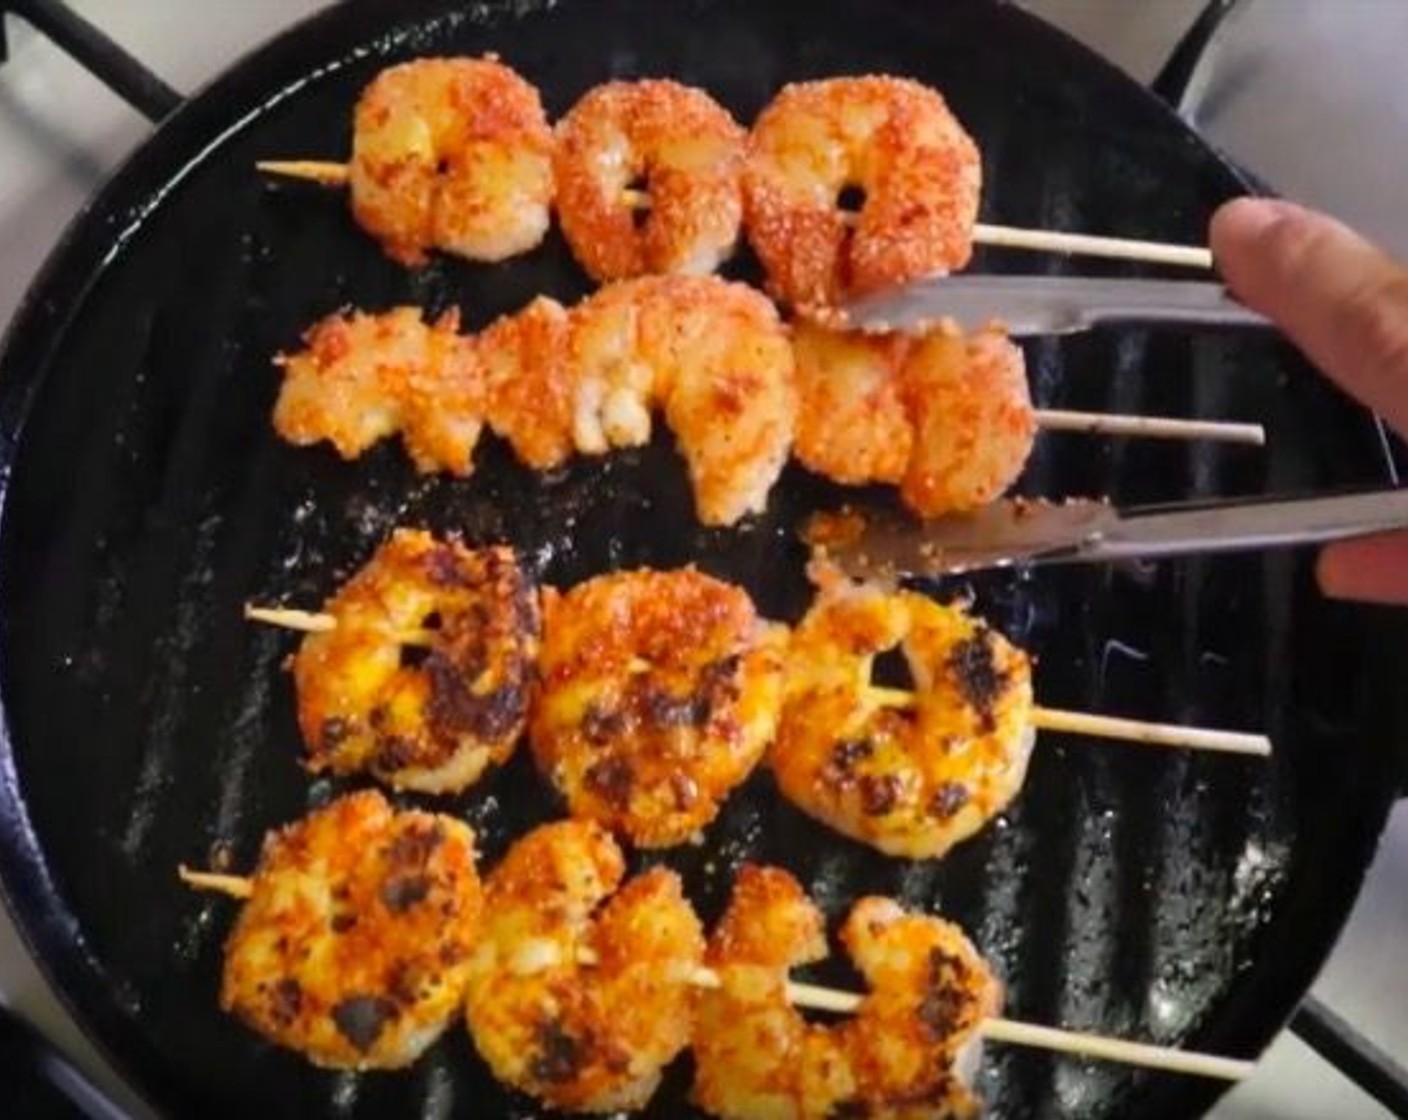 step 7 Once the pan gets hot, add the shrimp kabobs and cook for 2 minutes on each side. Once done, set the shrimp kabobs aside.